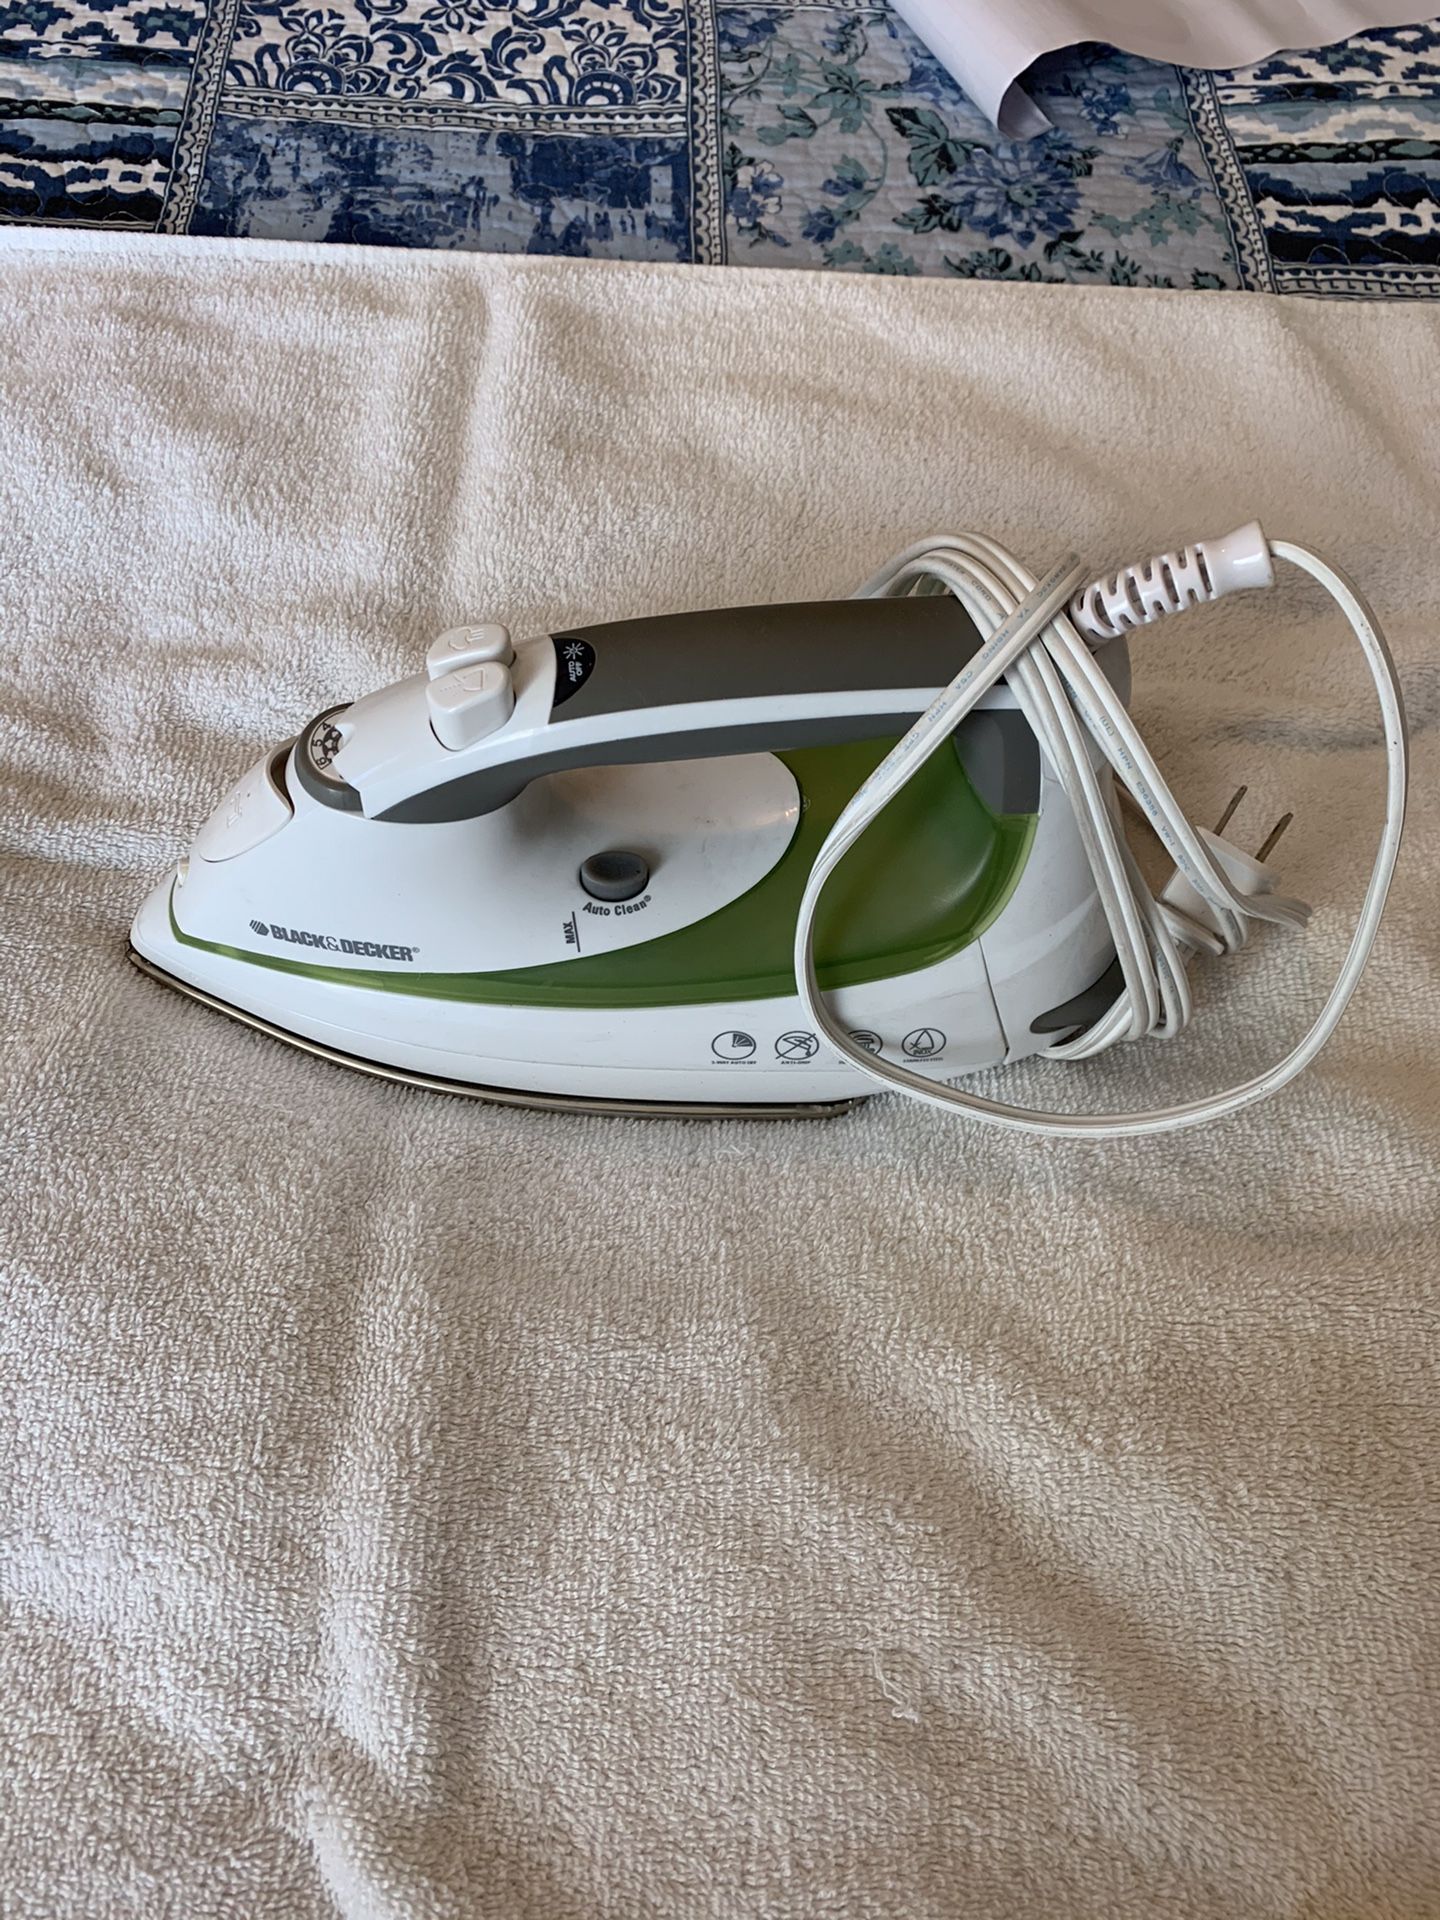 Black and decker iron. Like new